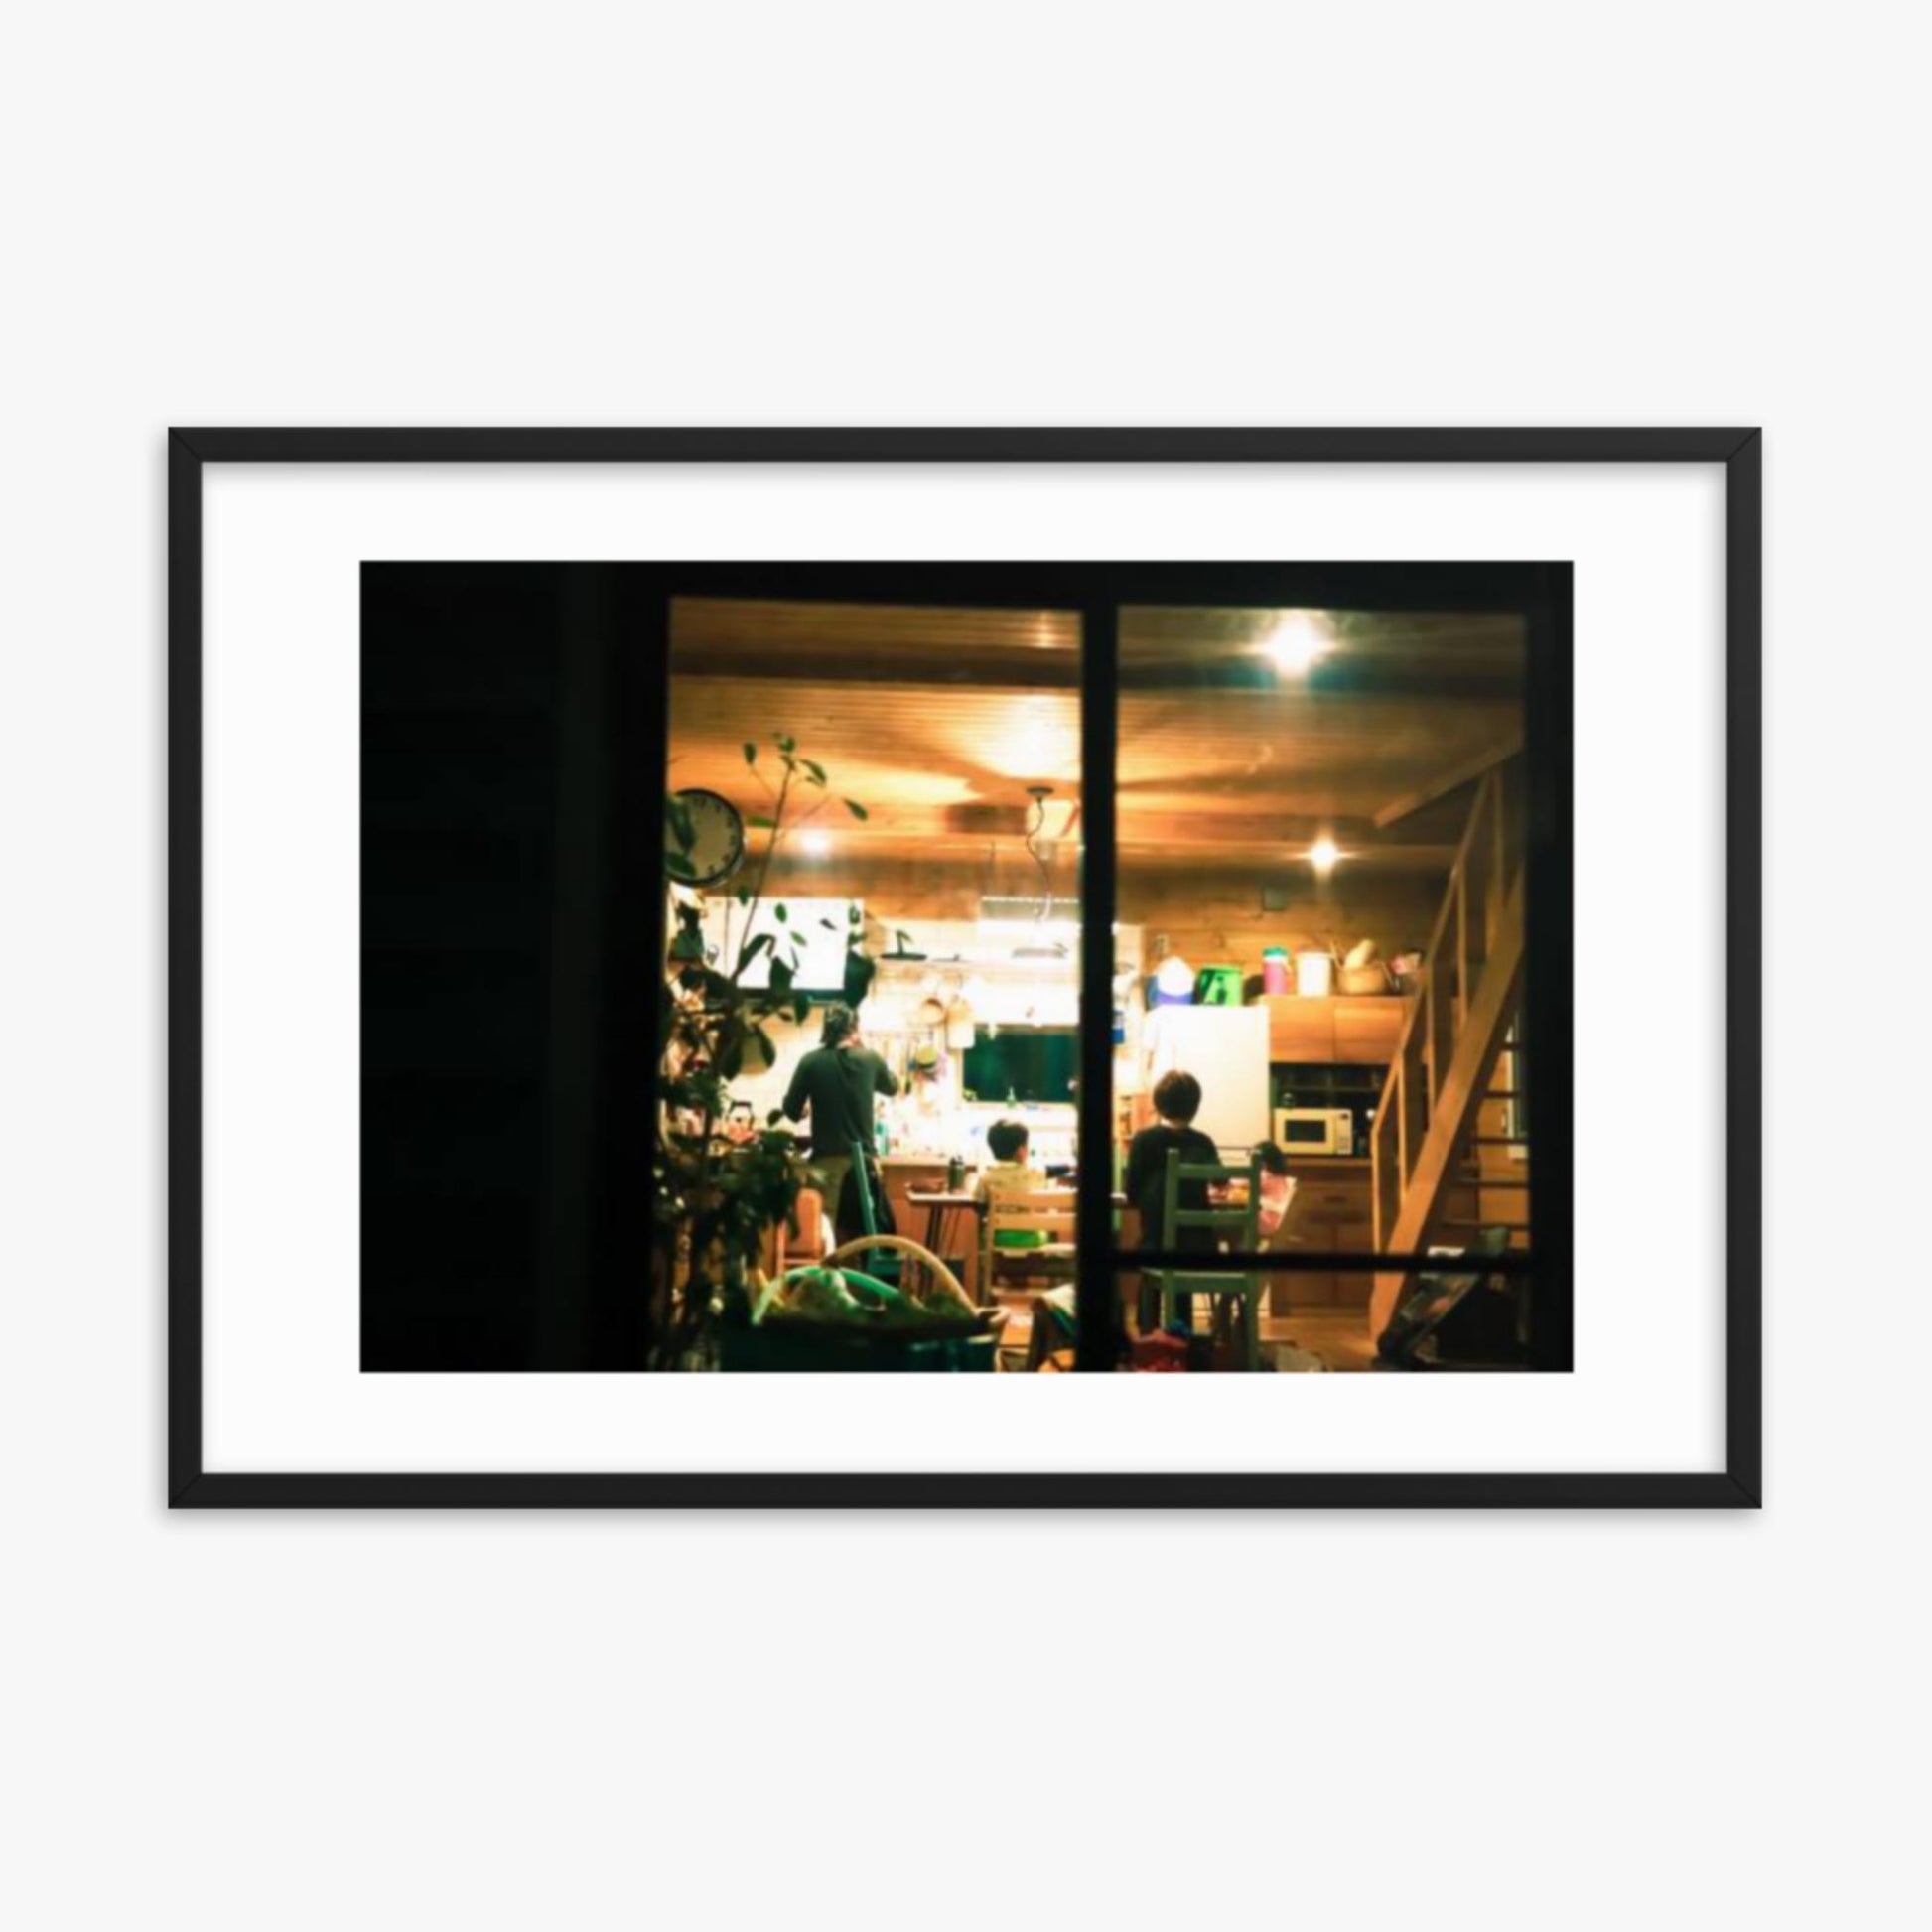 Log cabin seen through the window 24x36 in Poster With Black Frame